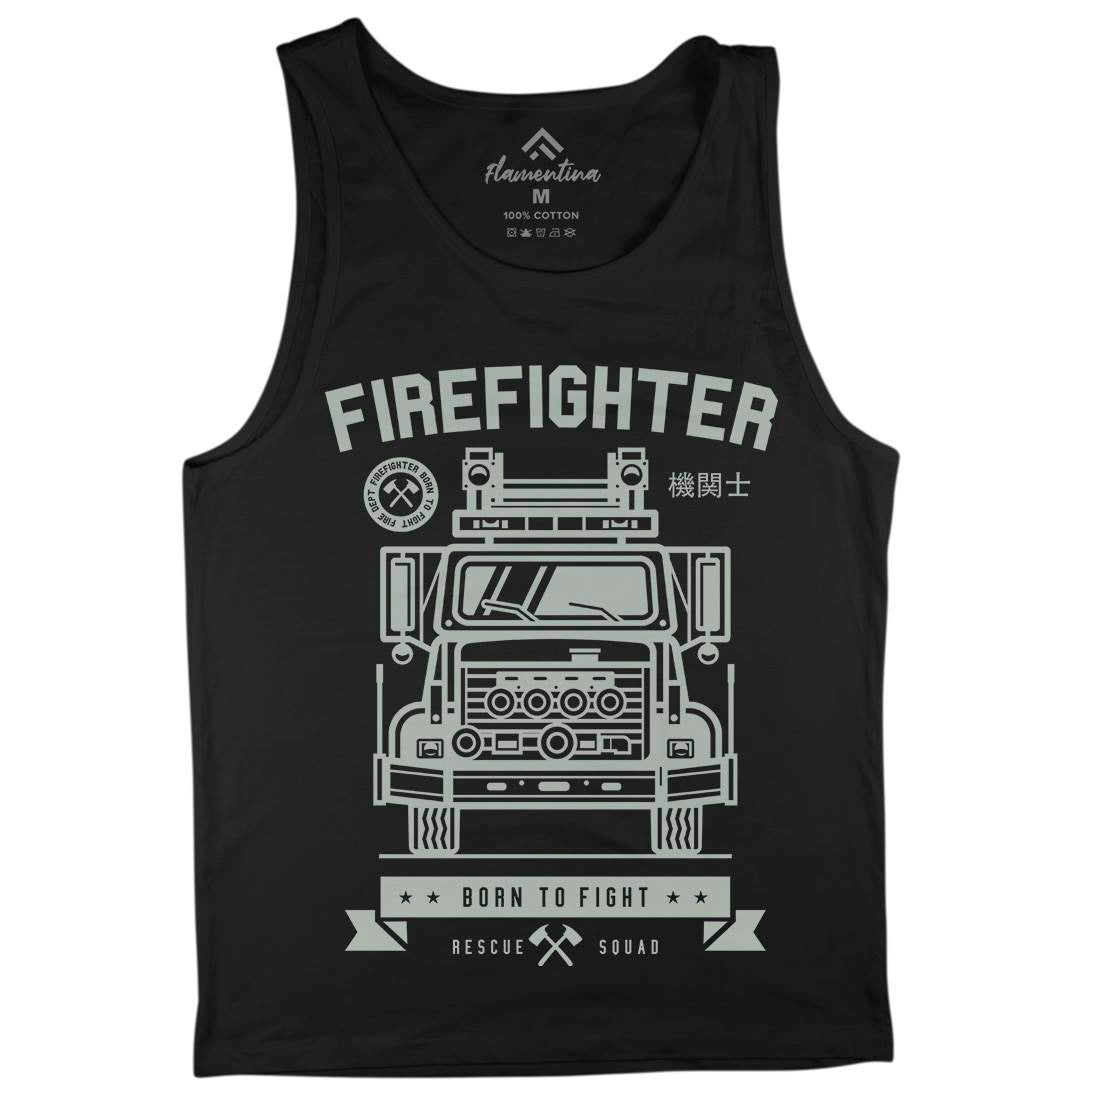 Fire Fighter Mens Tank Top Vest Firefighters A229